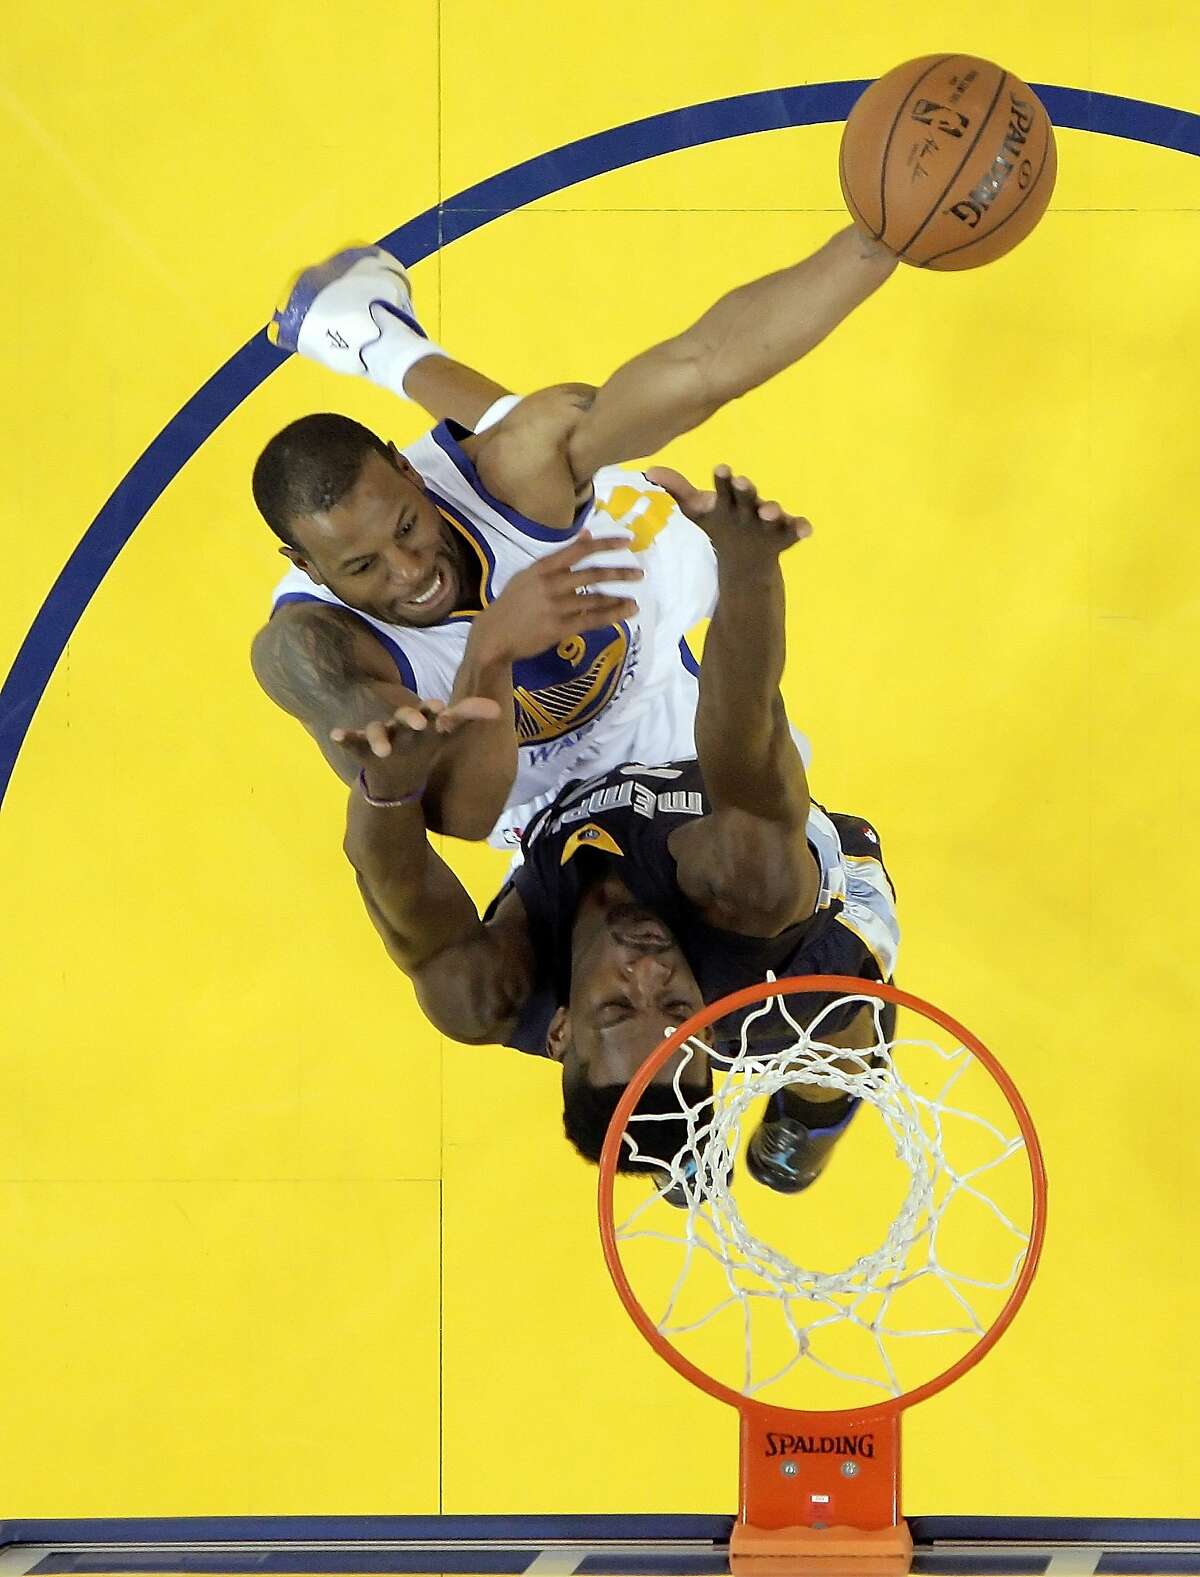 Andre Iguodala (9) puts in a shot defended by Jeff Green (32) during the first half. The Golden State Warriors played the Memphis Grizzlies at Oracle Arena in Oakland, Calif., in Game 1 of the Western Conference Semifinals on Sunday, May 3, 2015.